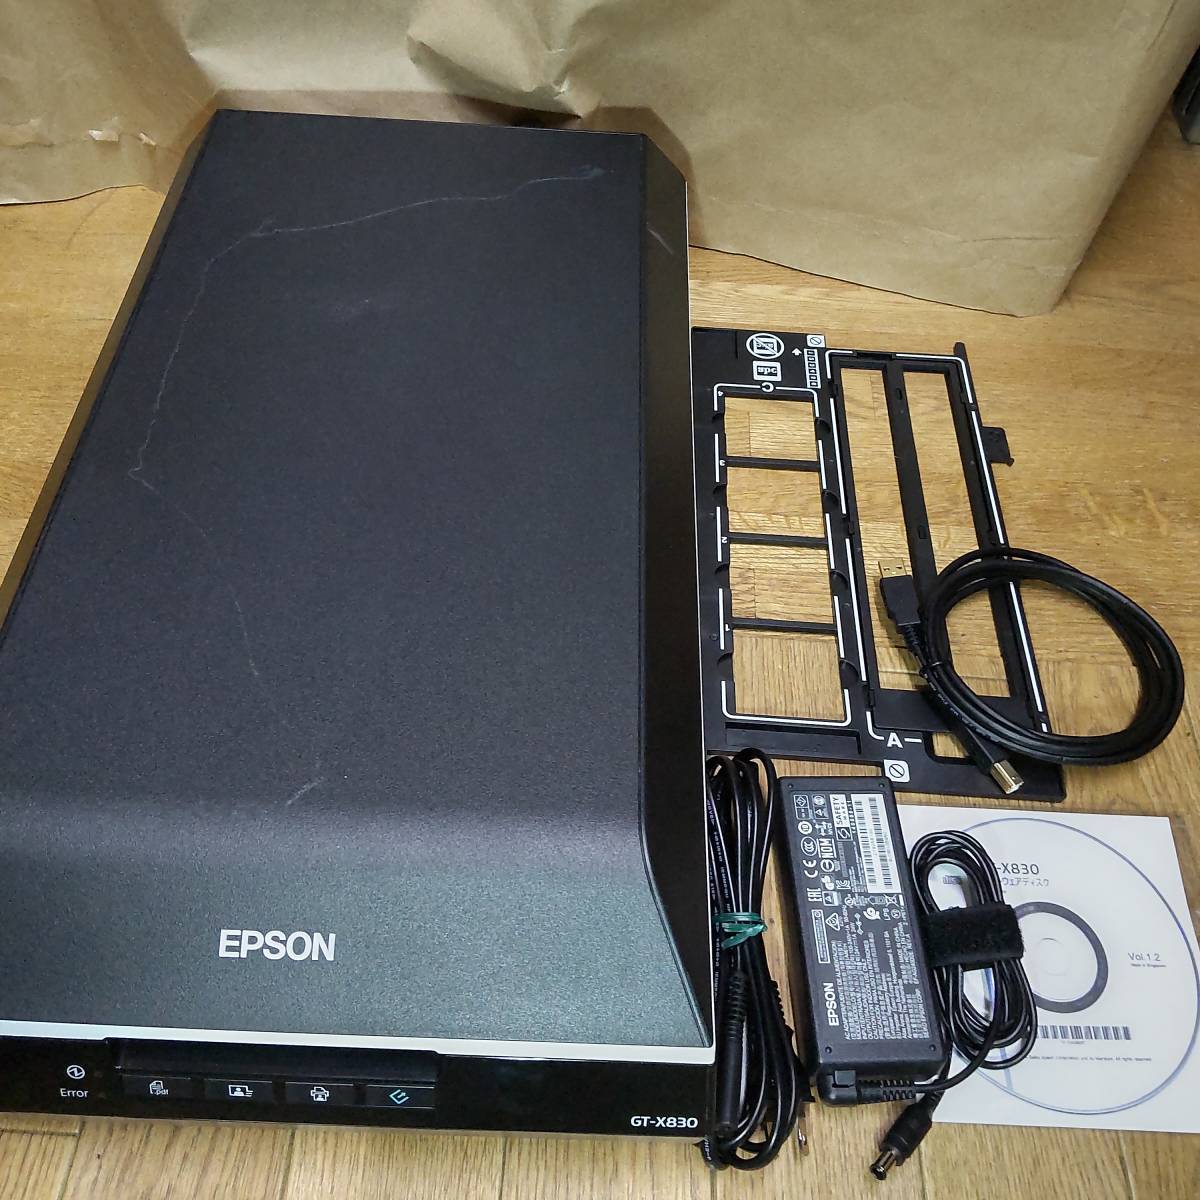 EPSON GT-X830 エプソン フィルムスキャナー フィルムホルダー付属